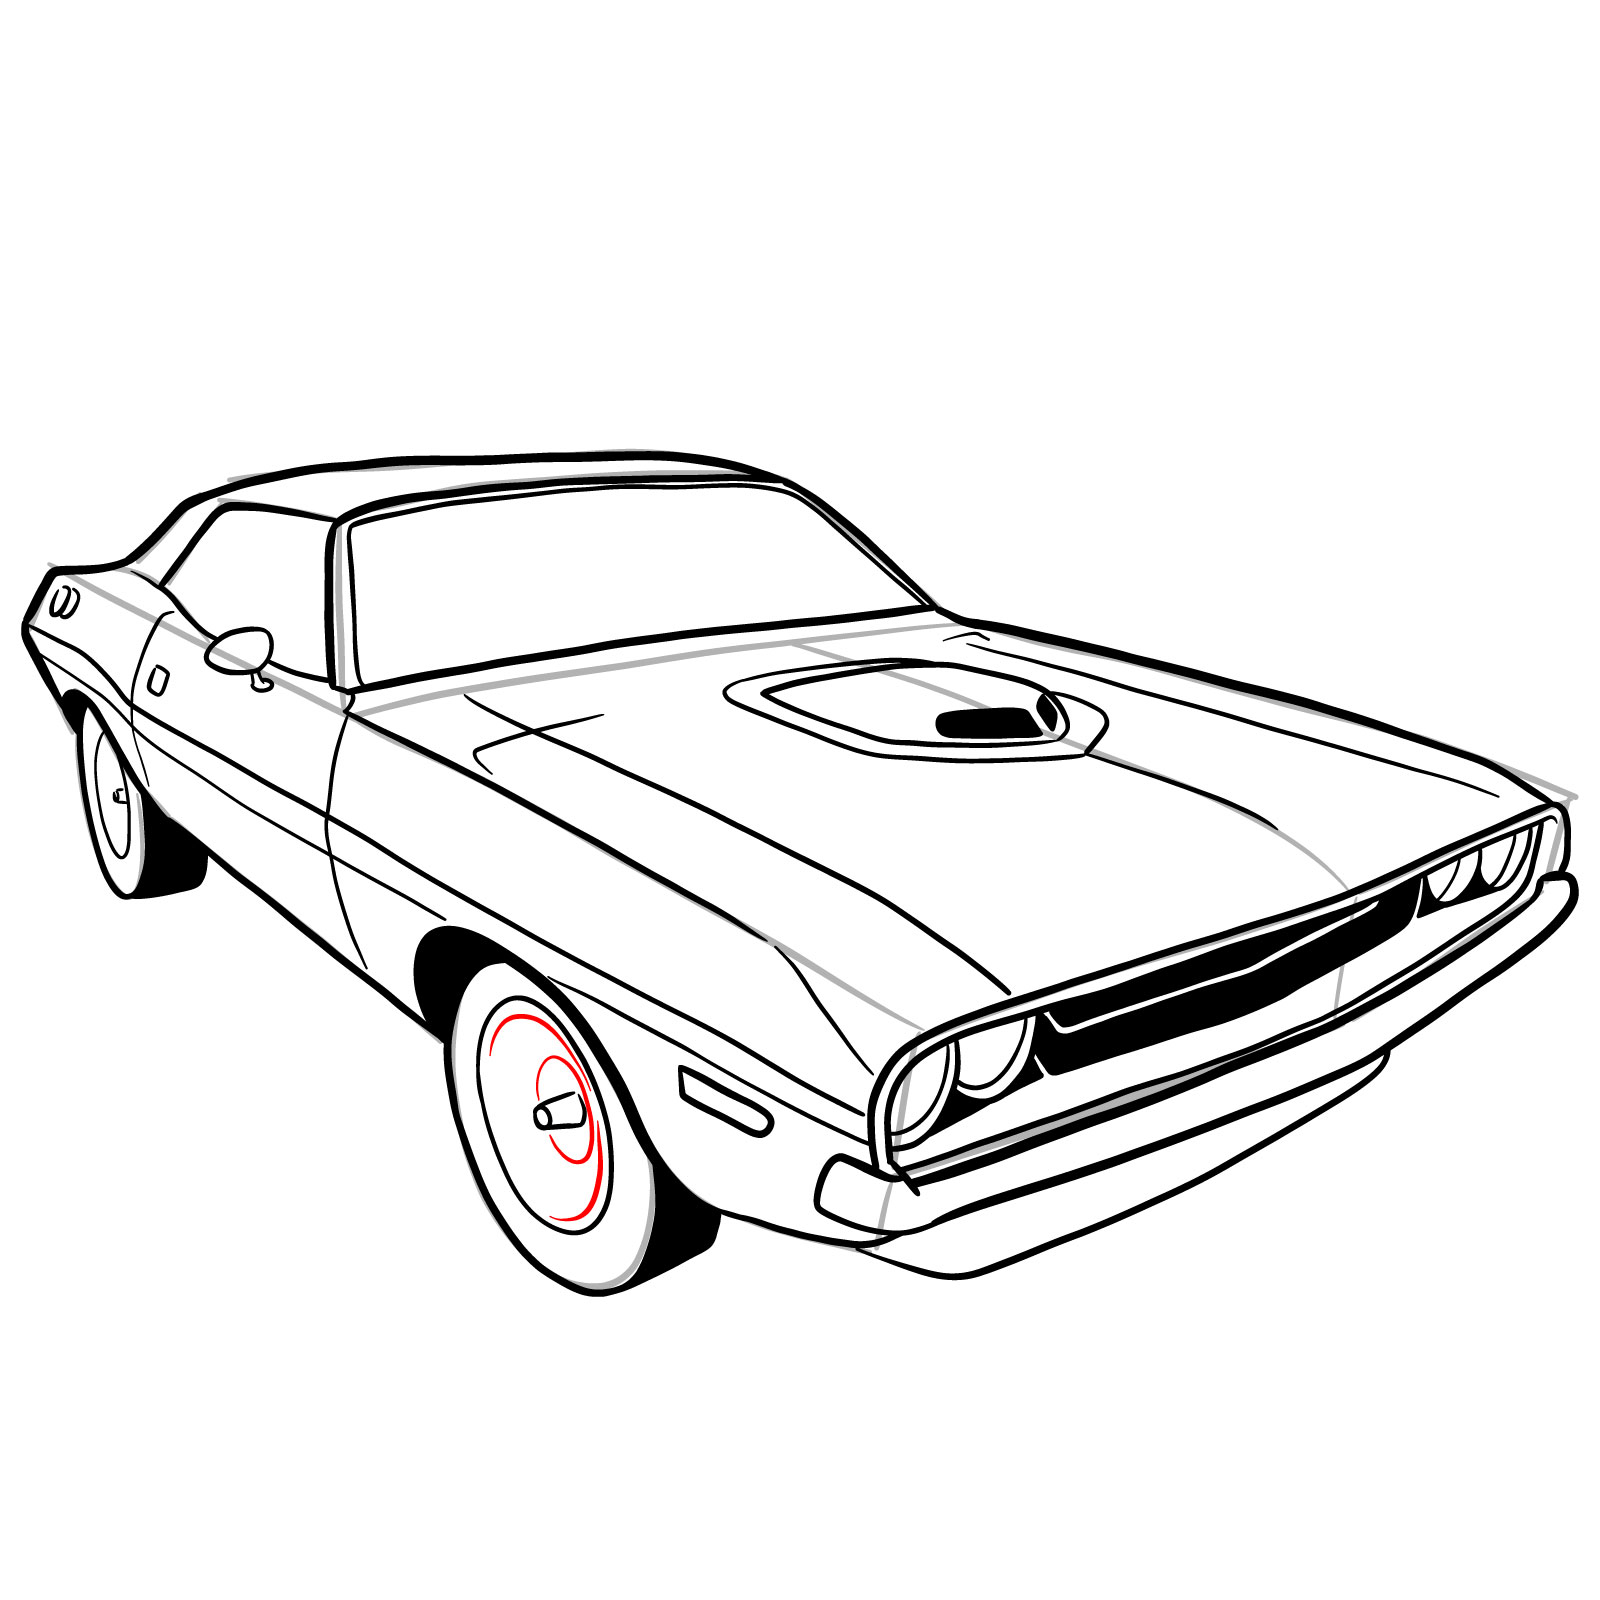 How to draw Dodge Challenger 1970 - step 33